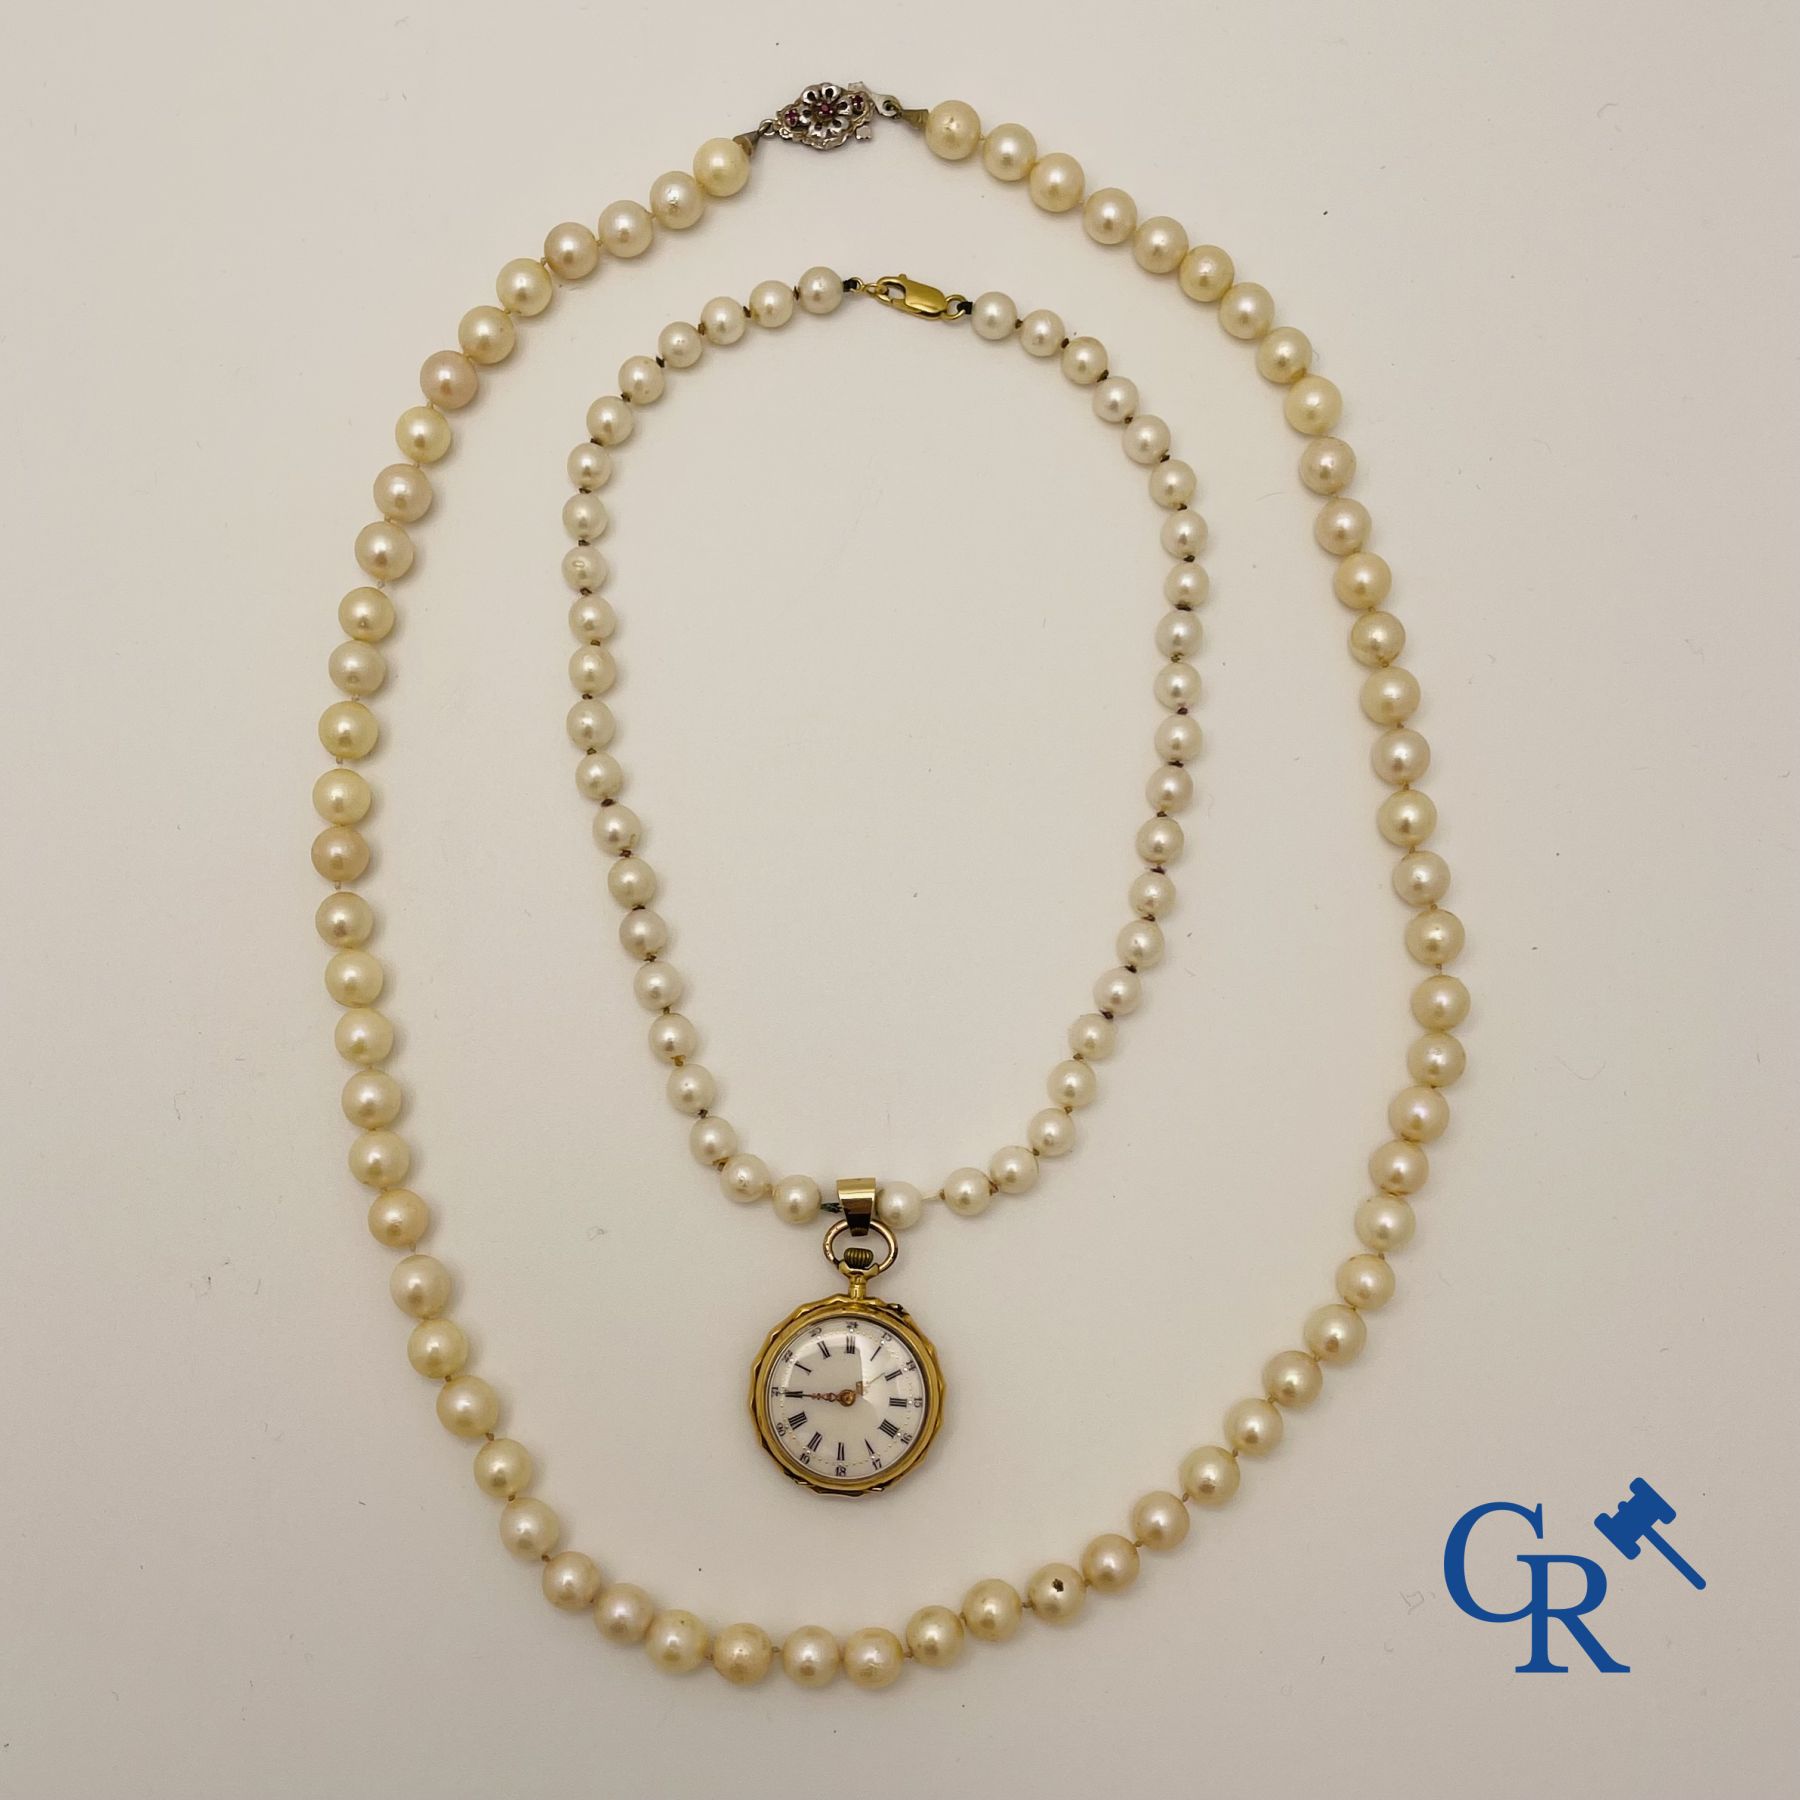 Jewel/Watches: Pearl necklace with clasp in white gold 18K and a women's pocket watch in gold 18K.